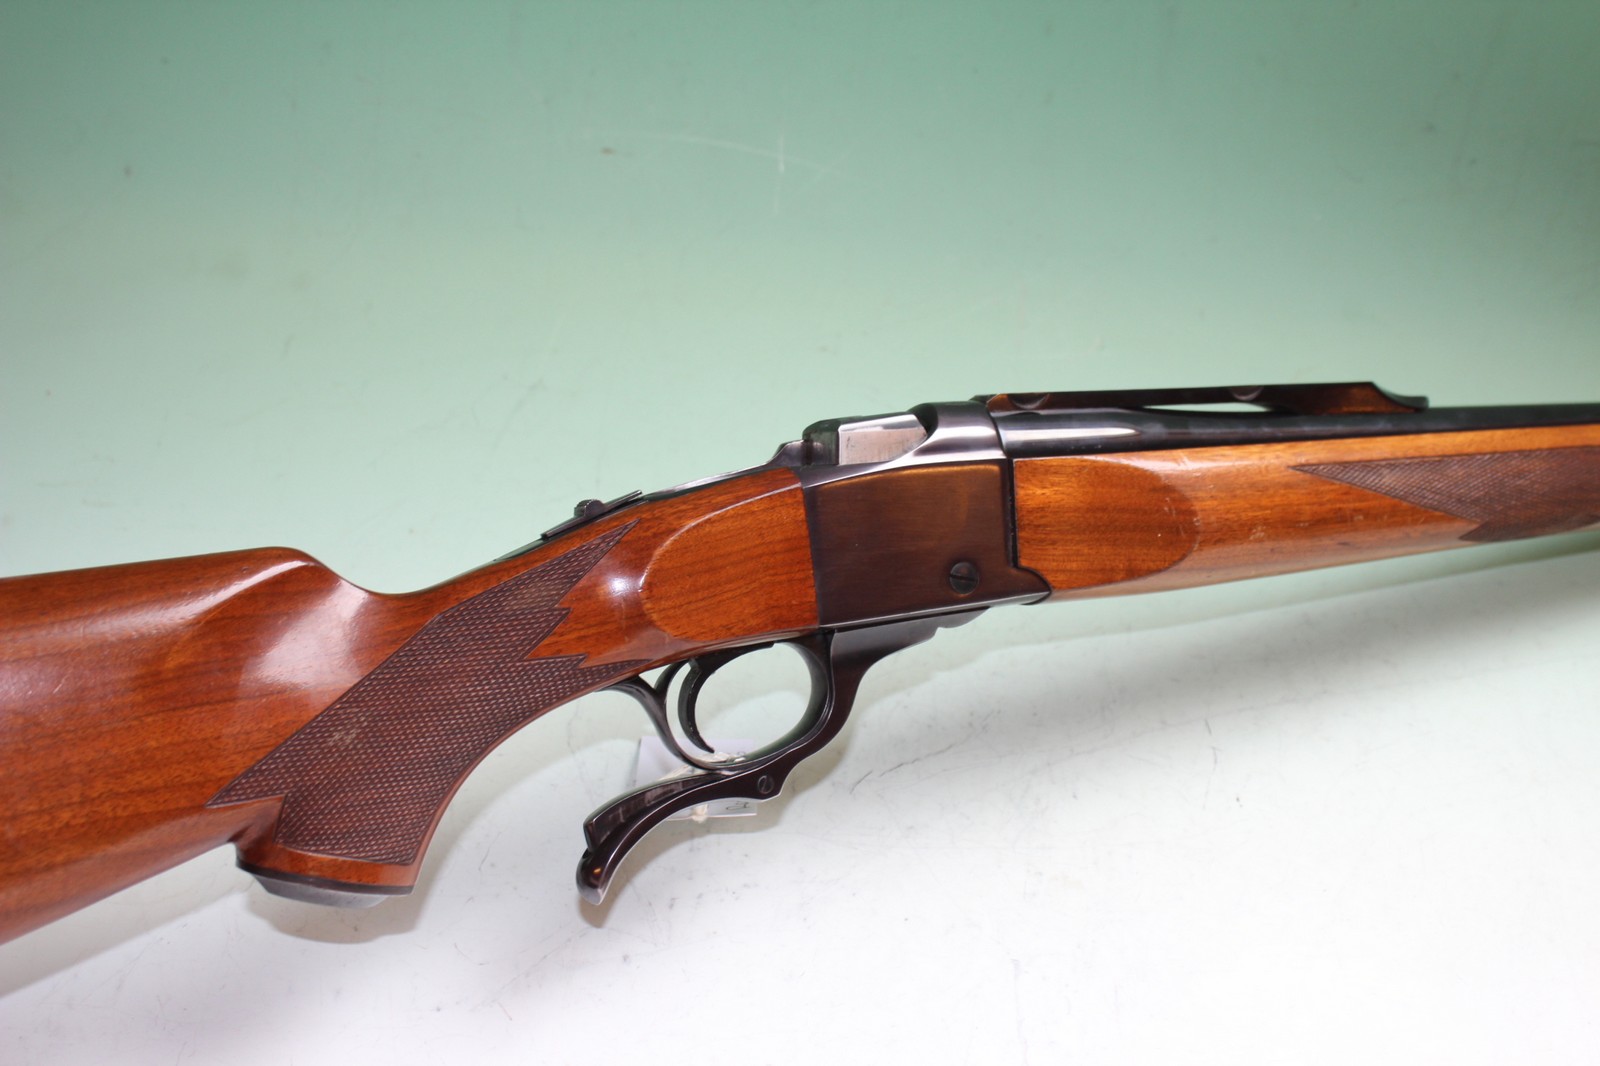 A Ruger .270 Winchester falling block rifle serial number 130-08396 (st no. 3176)